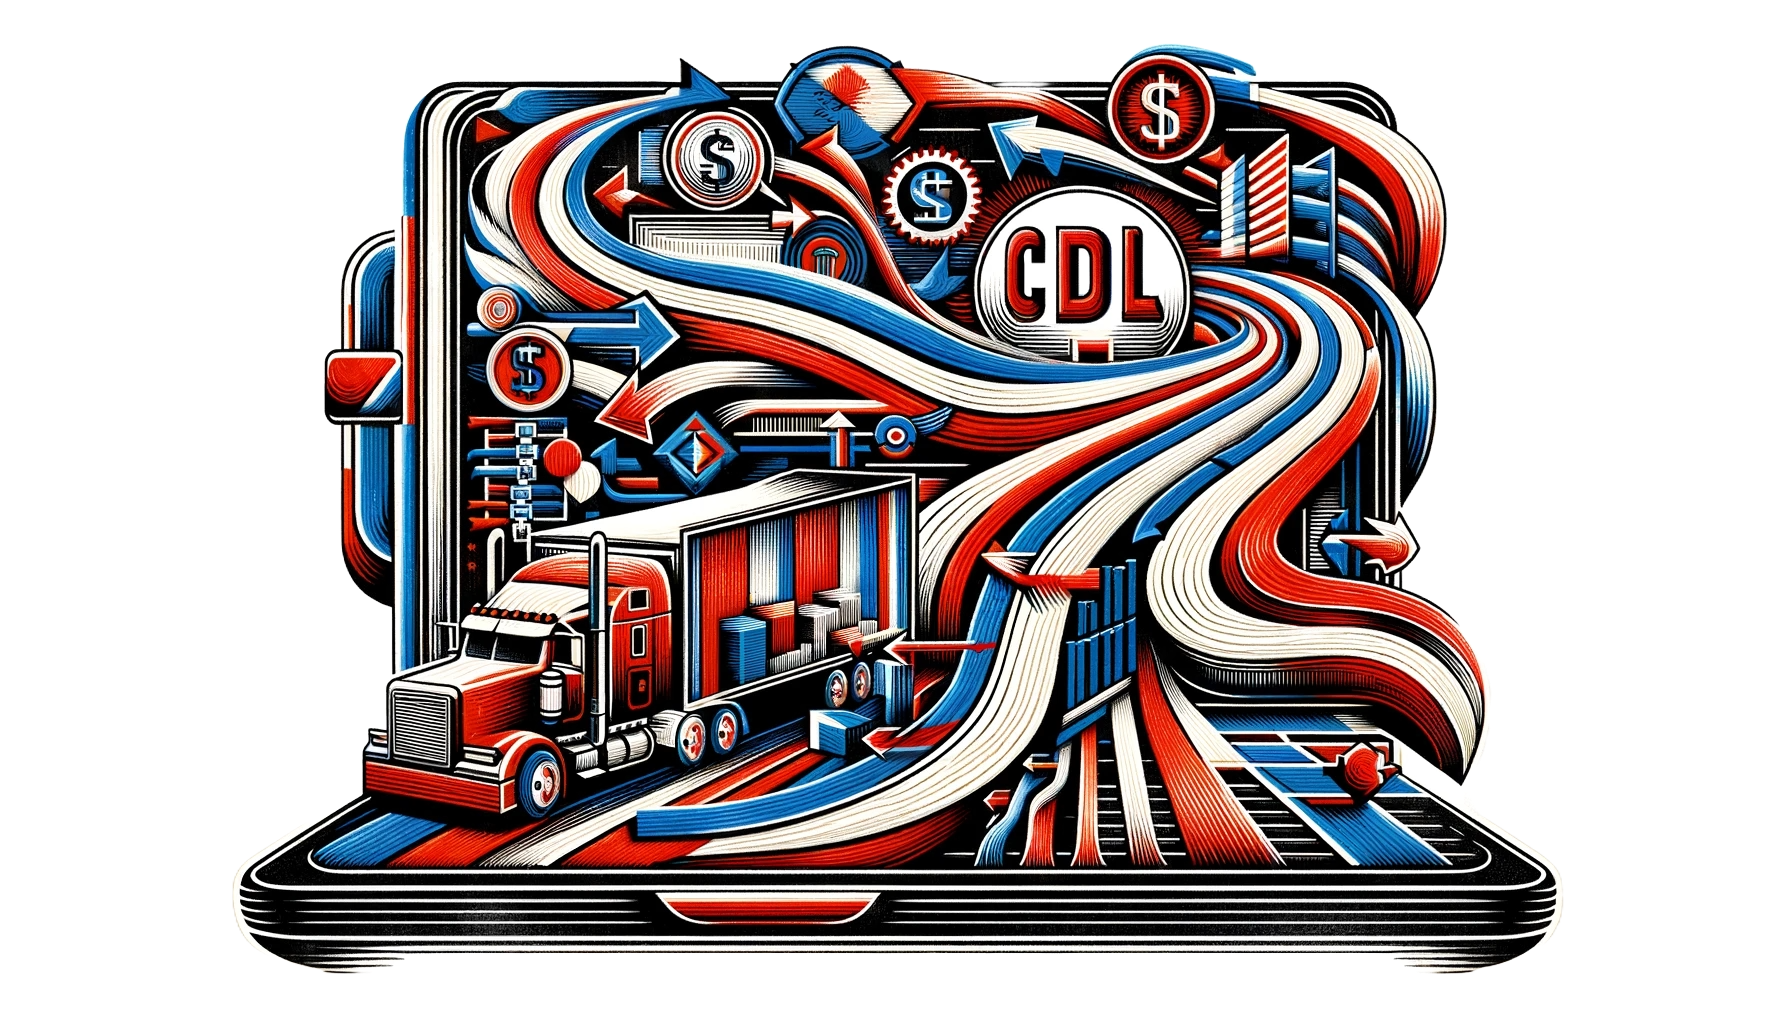 a colorful illustration of a truck with the word cdl on it that indicates CDL PowerSuites powerful CDL features